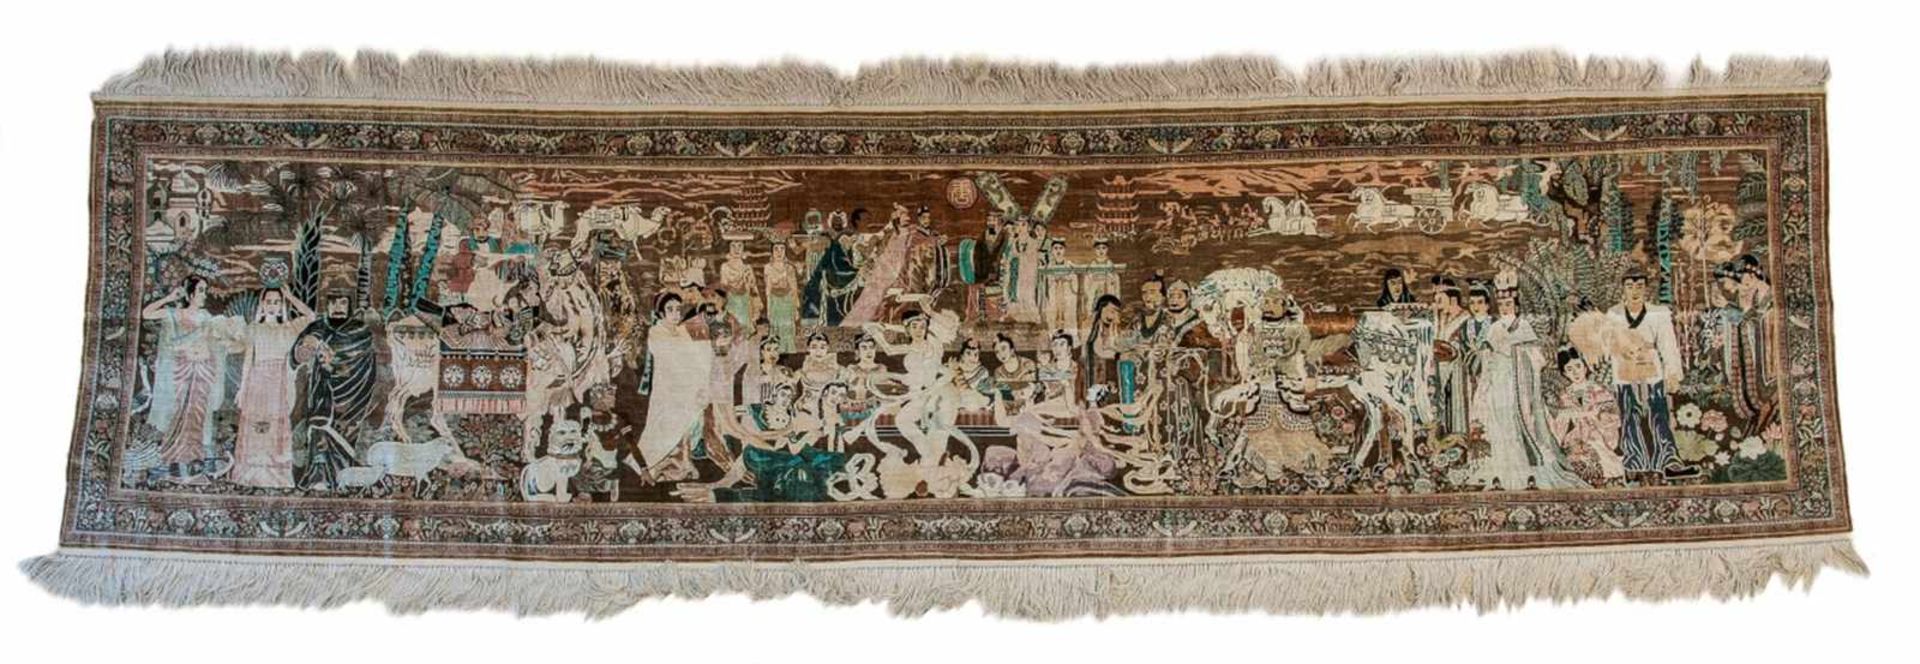 A Chinese silk wall hanging with a figural frieze366 x 93 cm. 20th C.Wandbehang mit